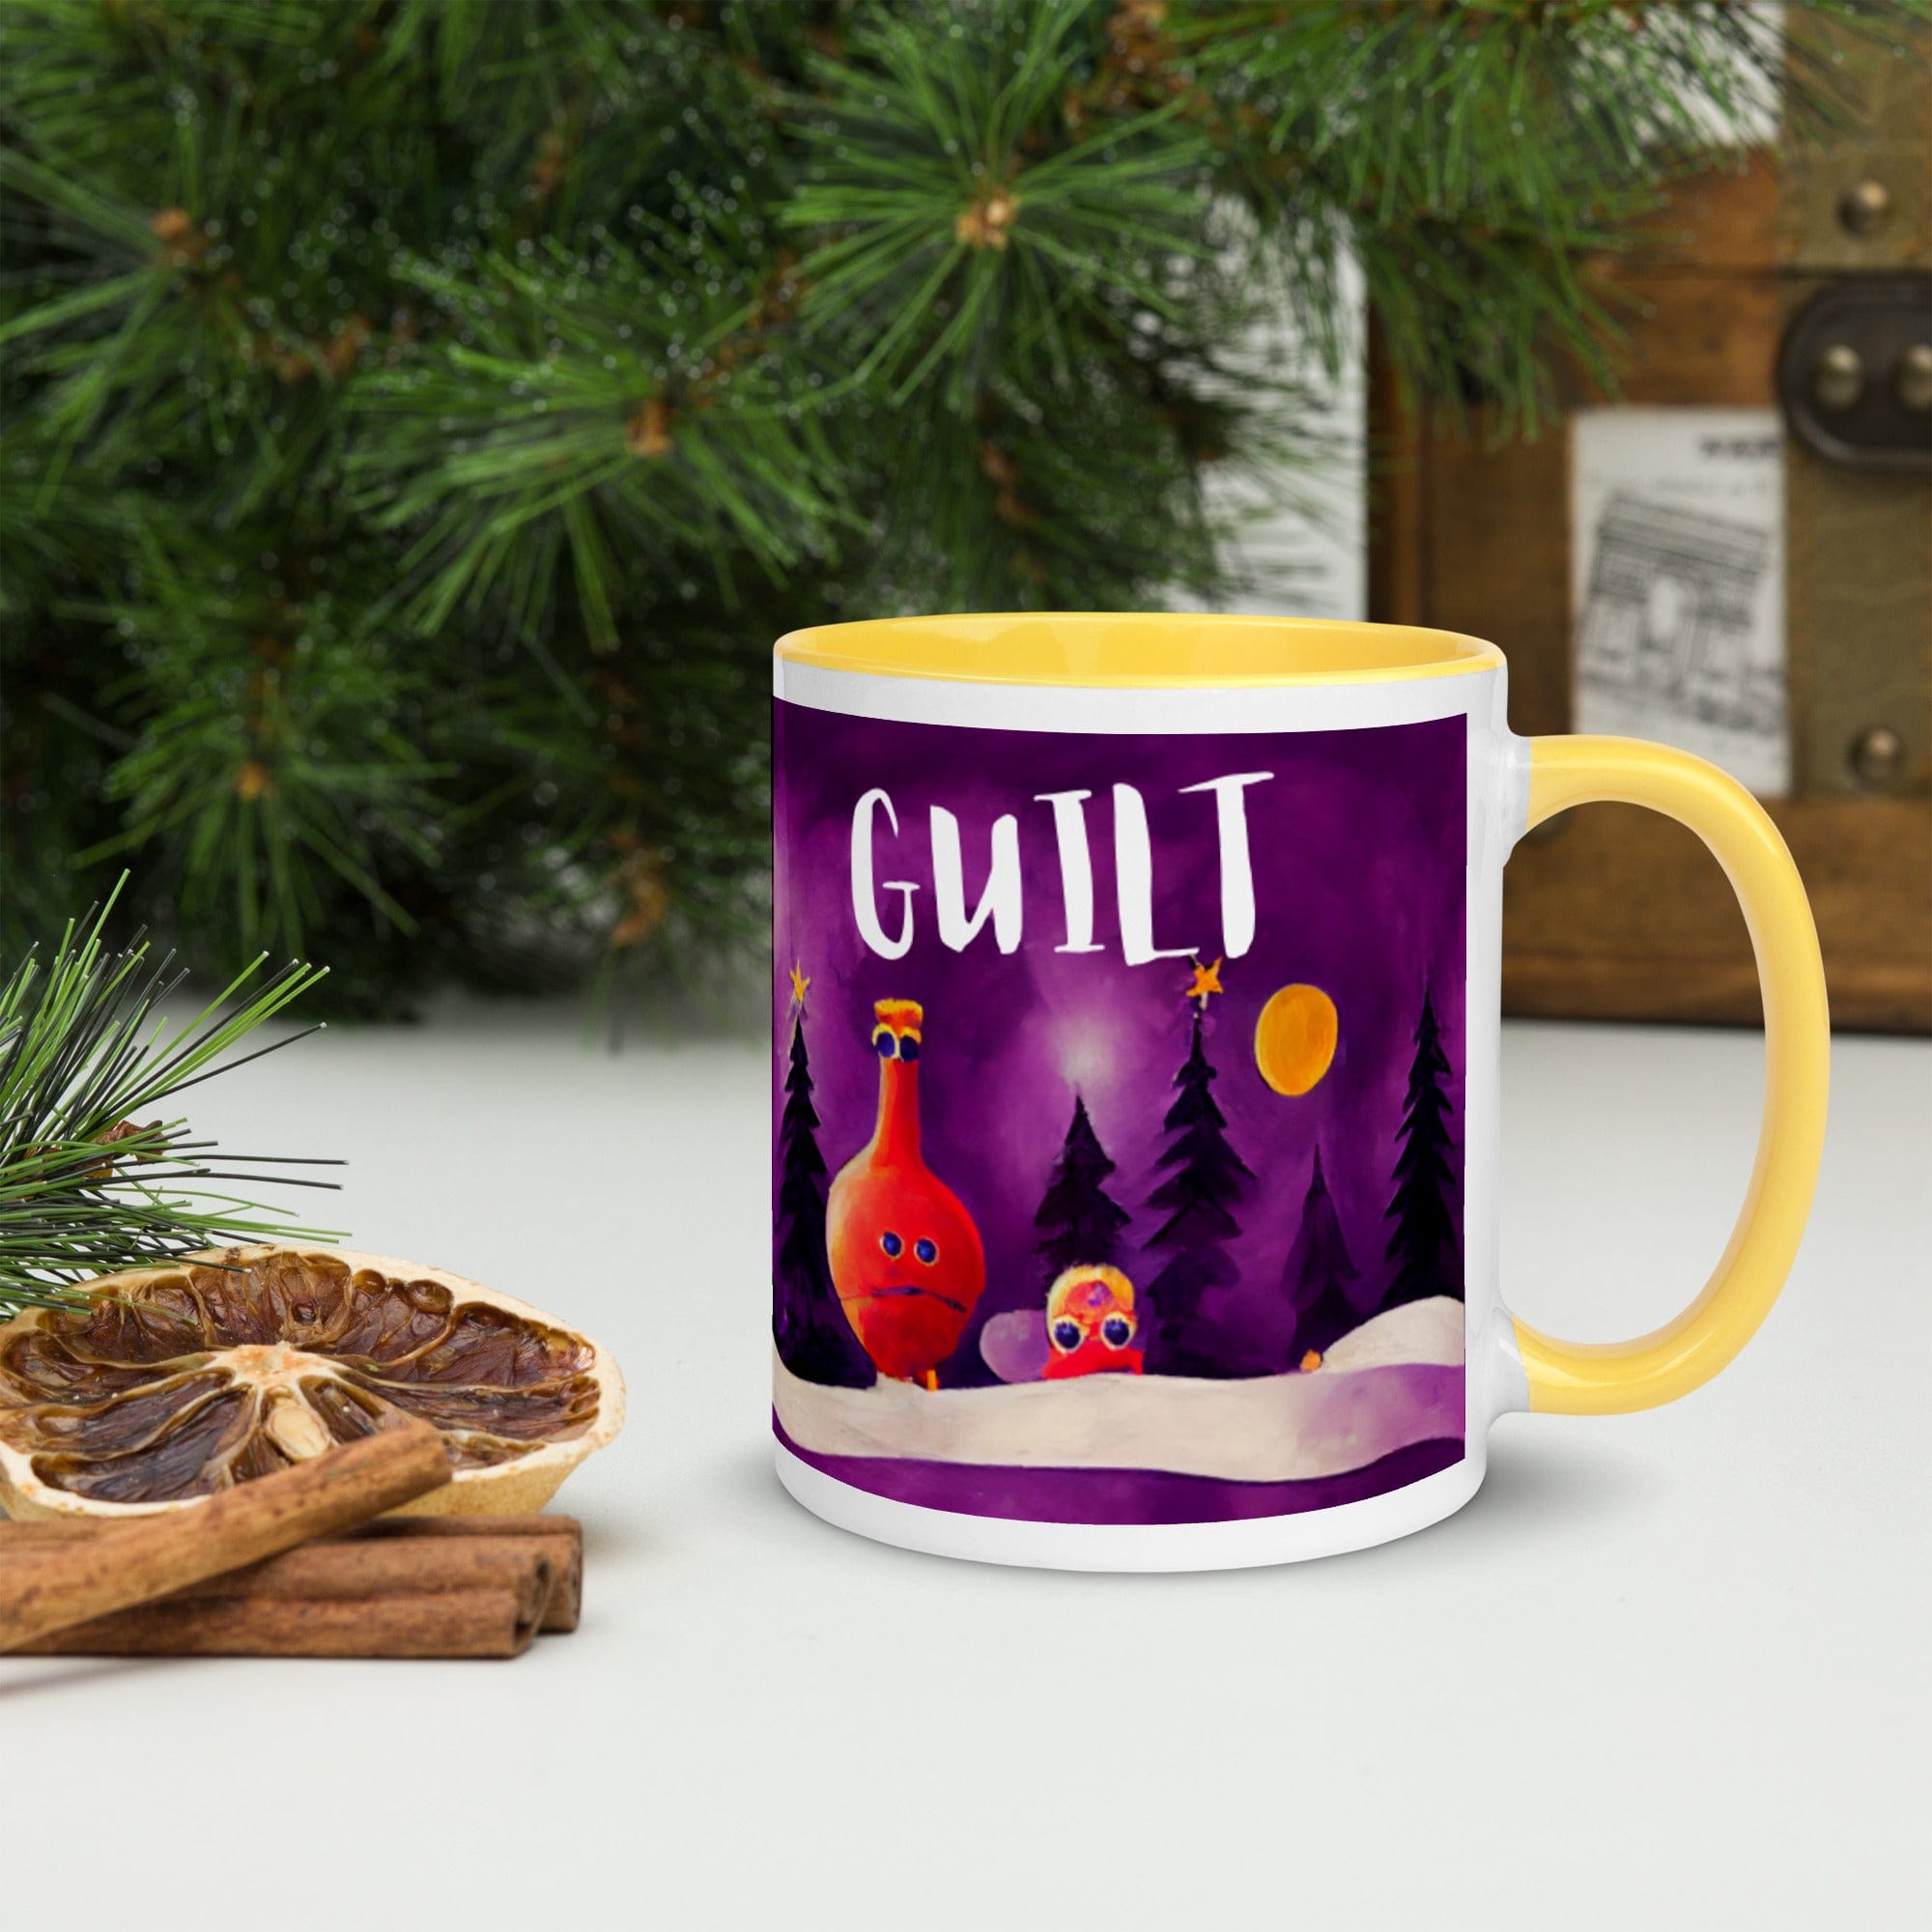 Accepting of my Guilt - Mug with Quirky Christmas Creatures